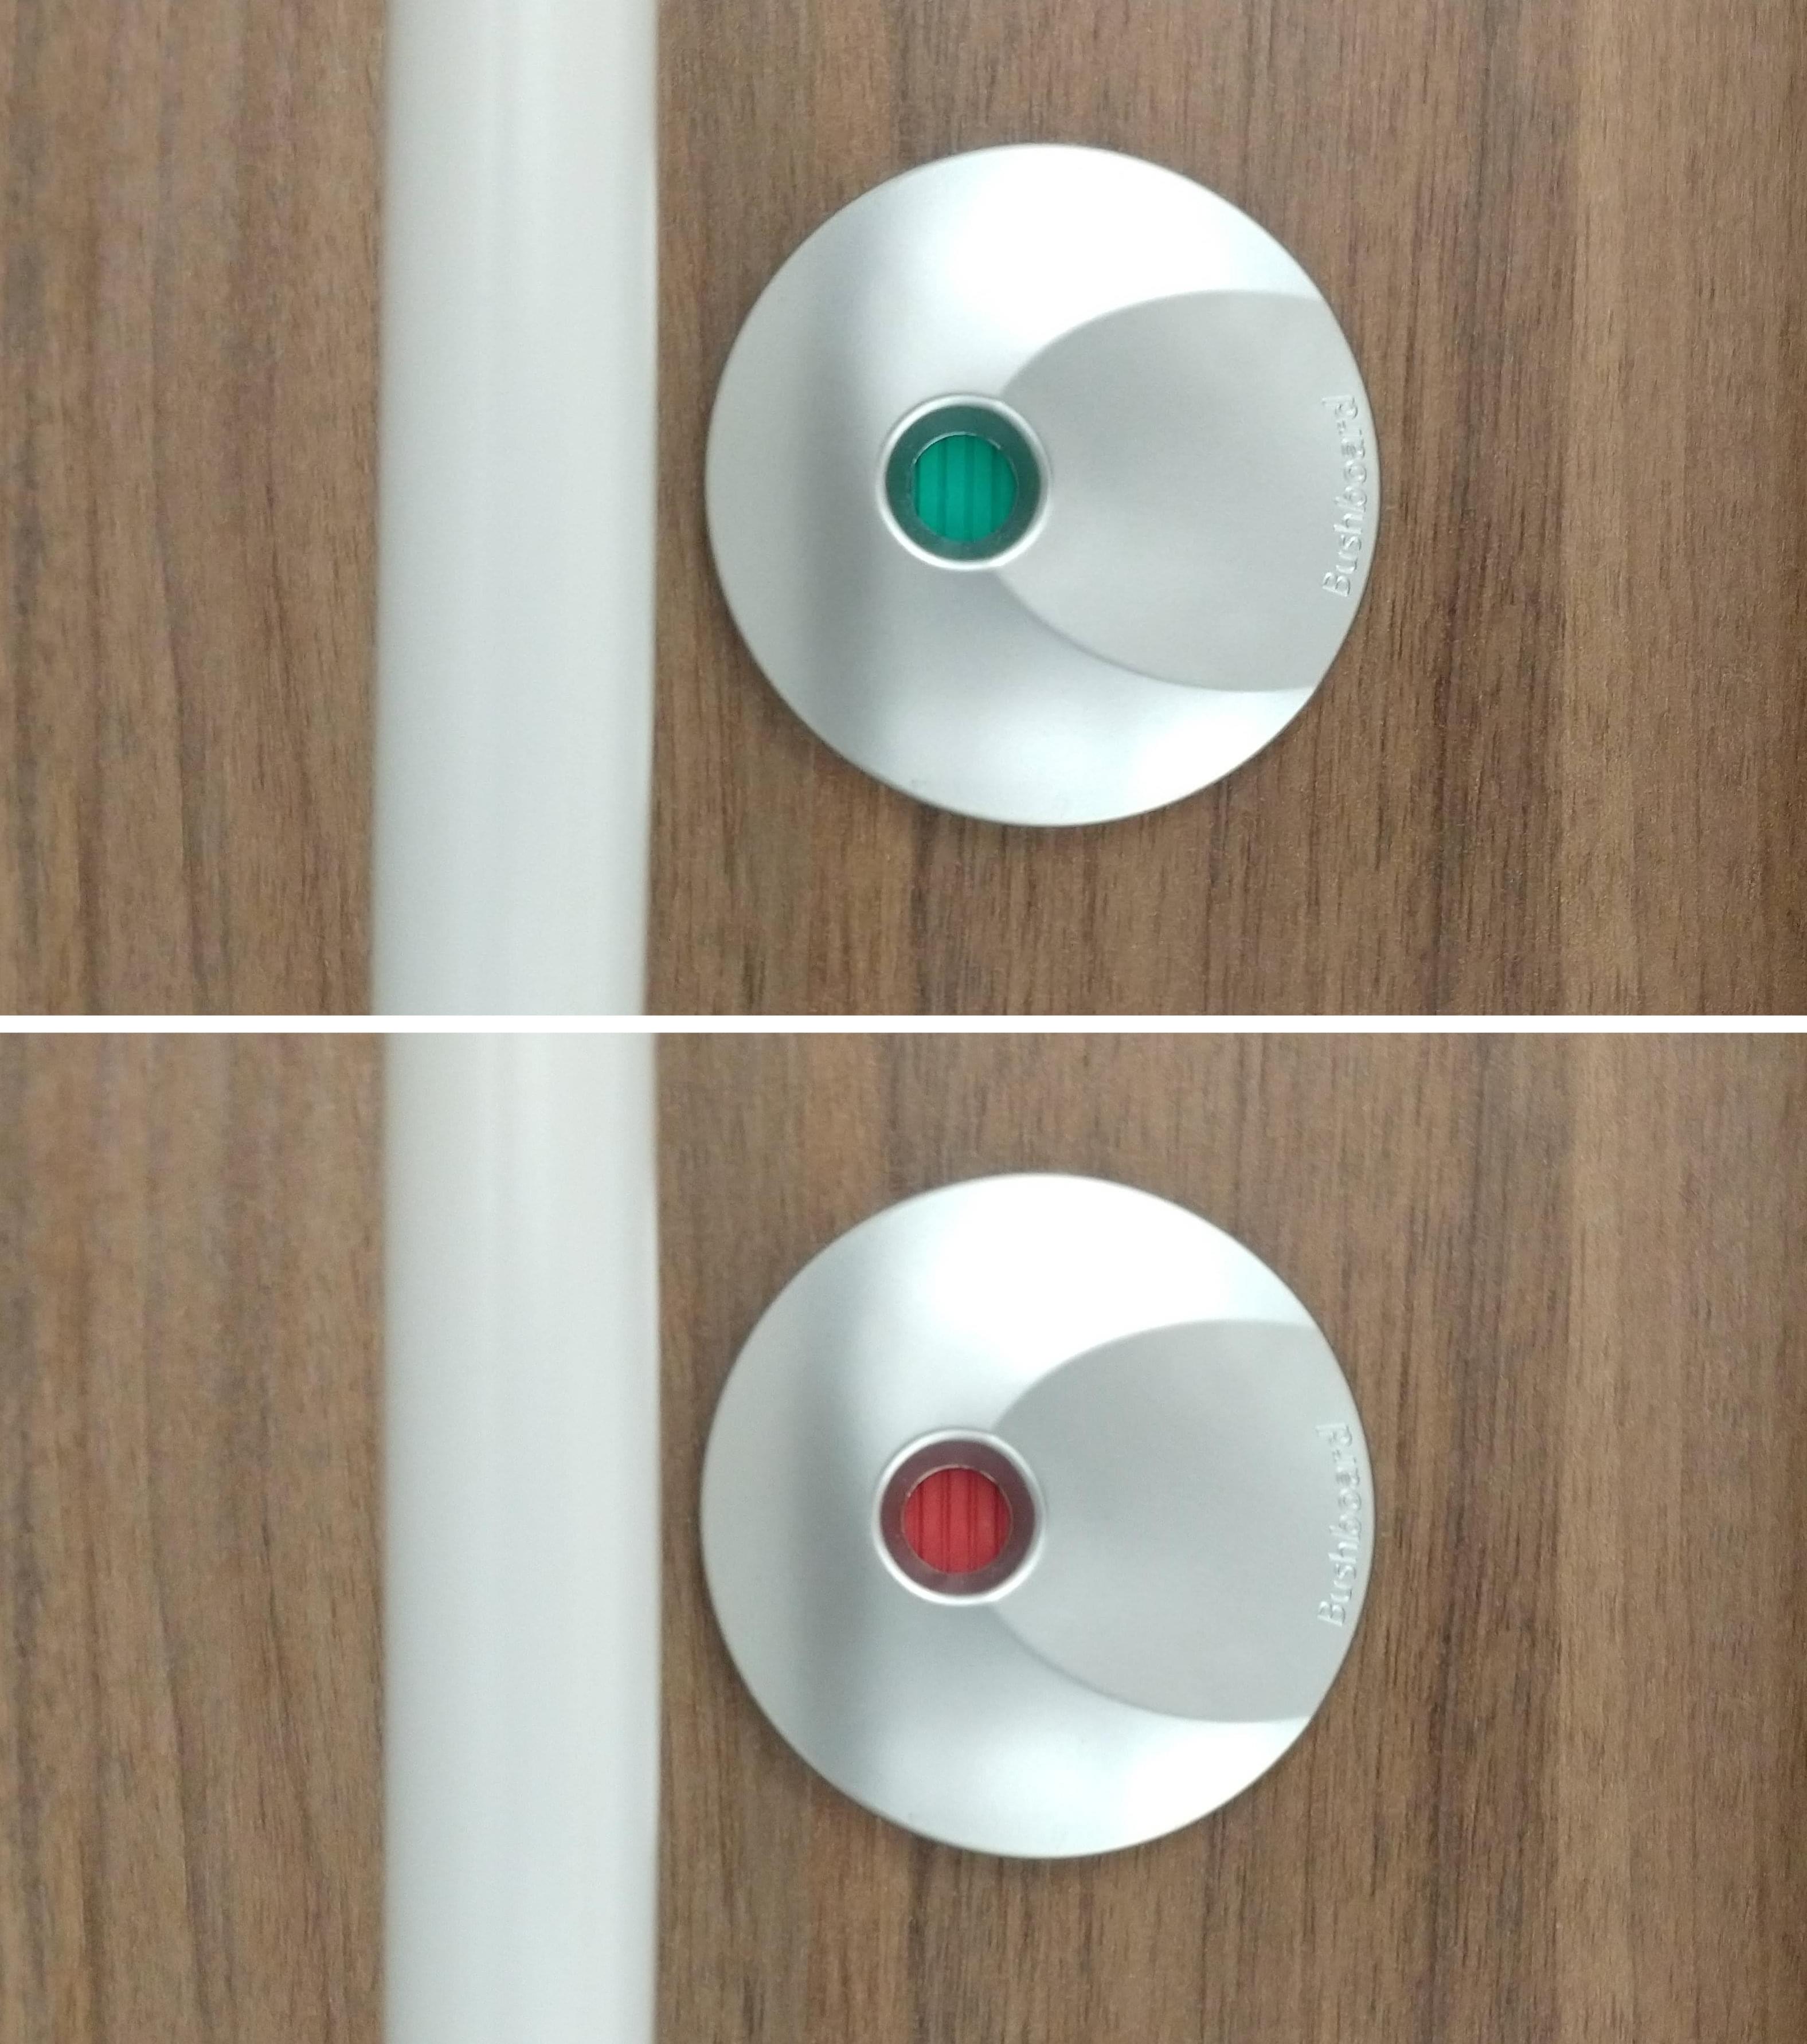 Montage showing two images of the same toilet door occupancy indicator. The top picture shows the indicator in green, the bottom in red.